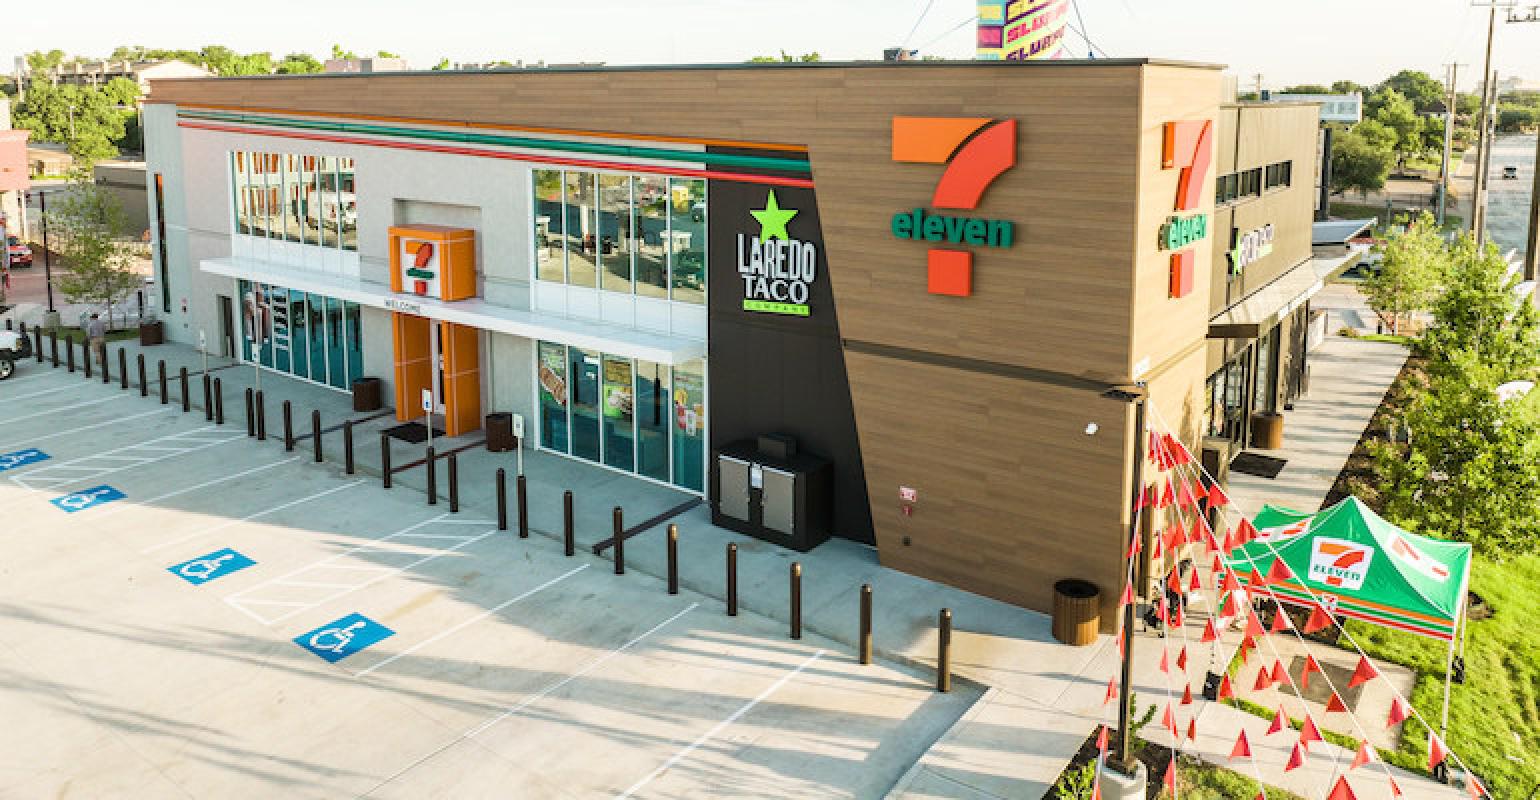 7-Eleven Buys 204 Stripes and Laredo Taco Stores, Expands Southwest